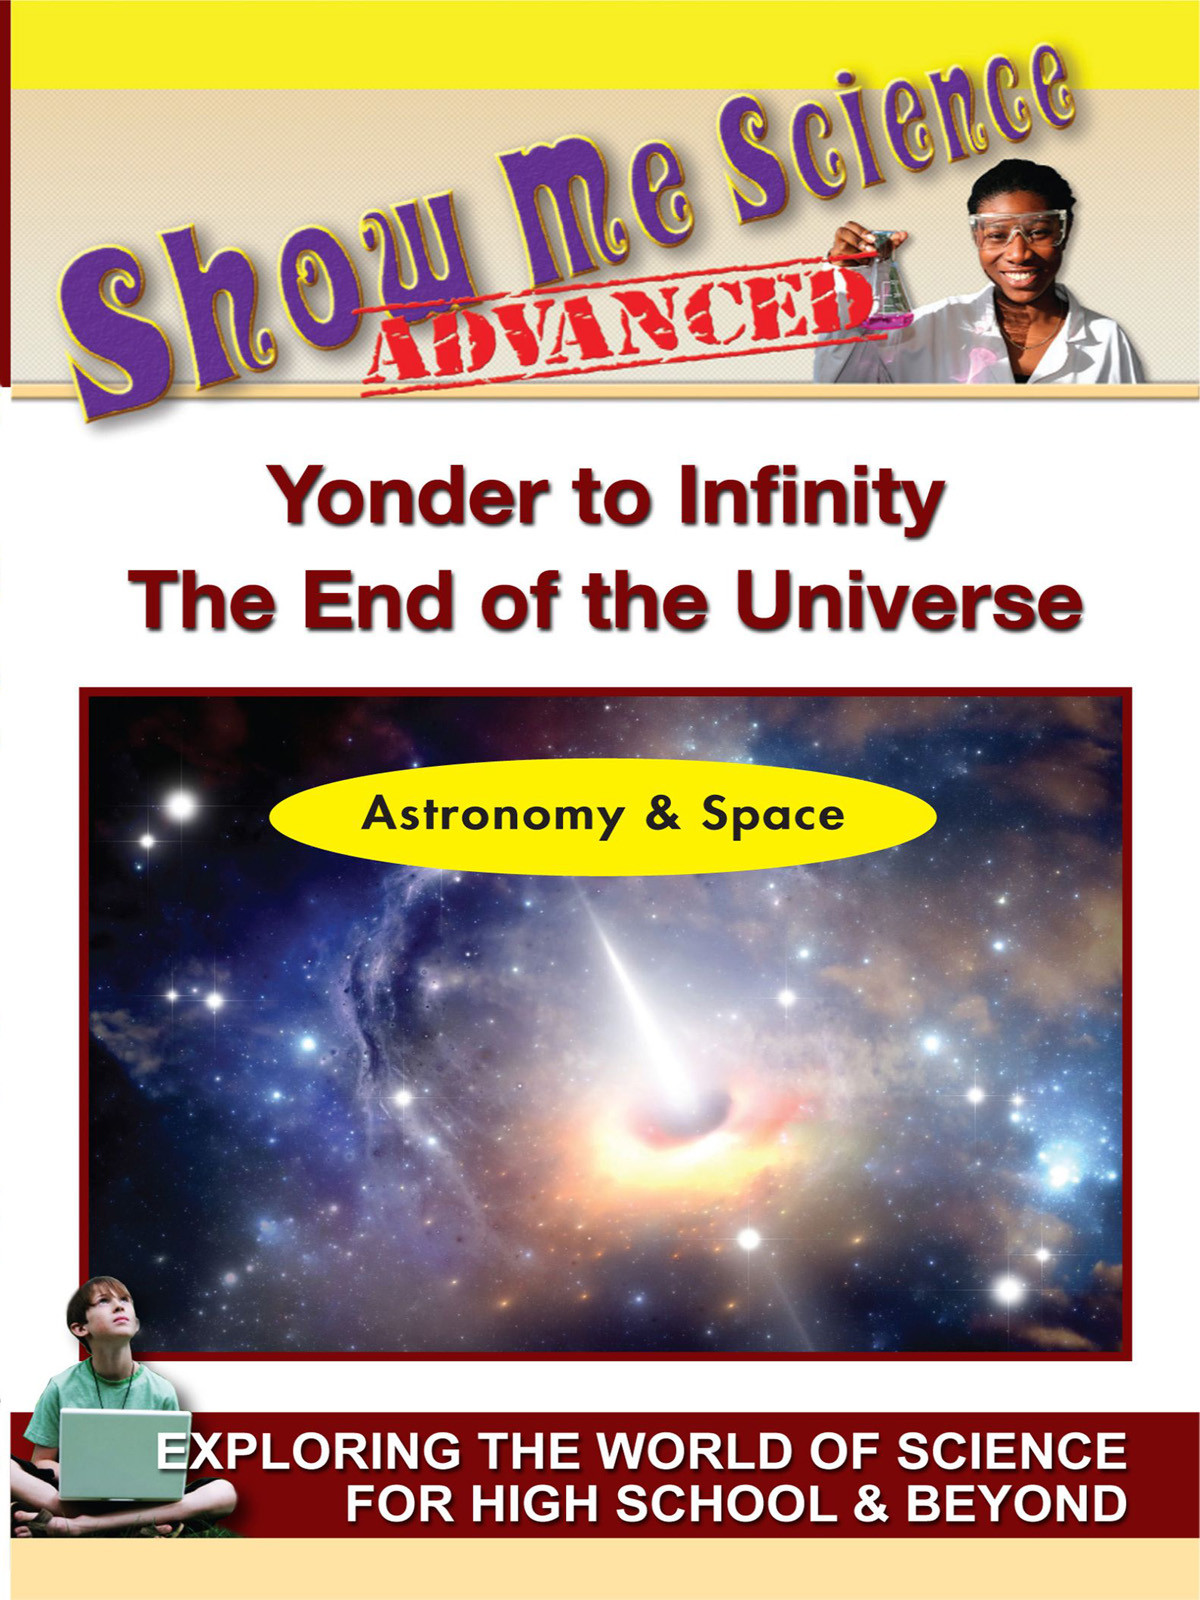 K4622 - Astronomy & Space Yonder to Infinity  The End of the Universe